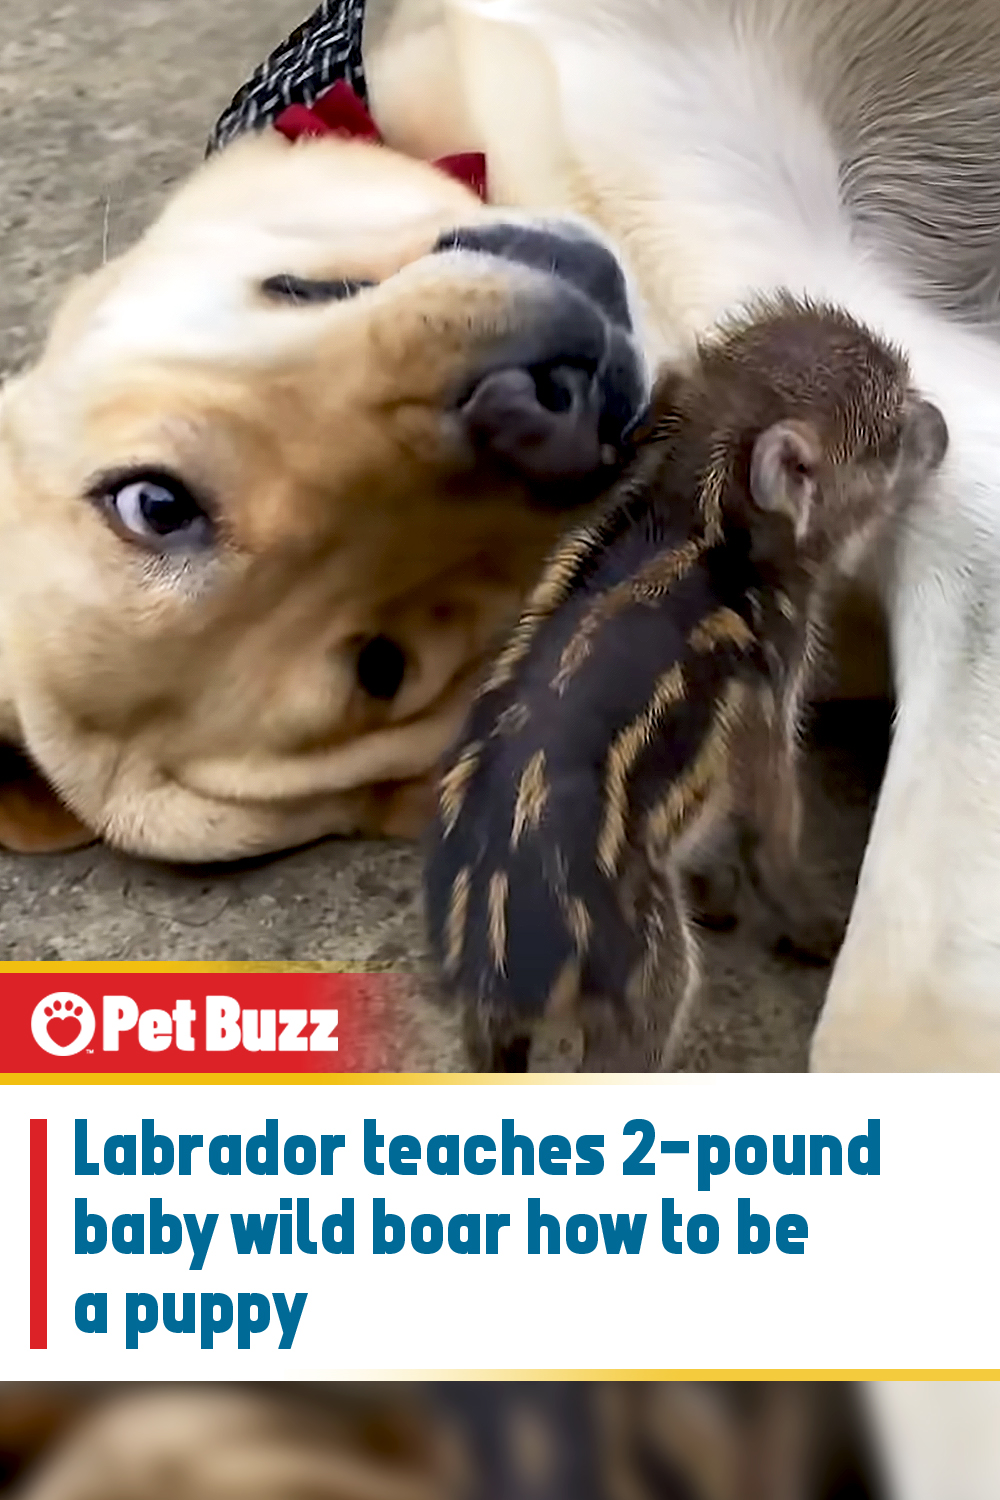 Labrador teaches 2-pound baby wild boar how to be a puppy